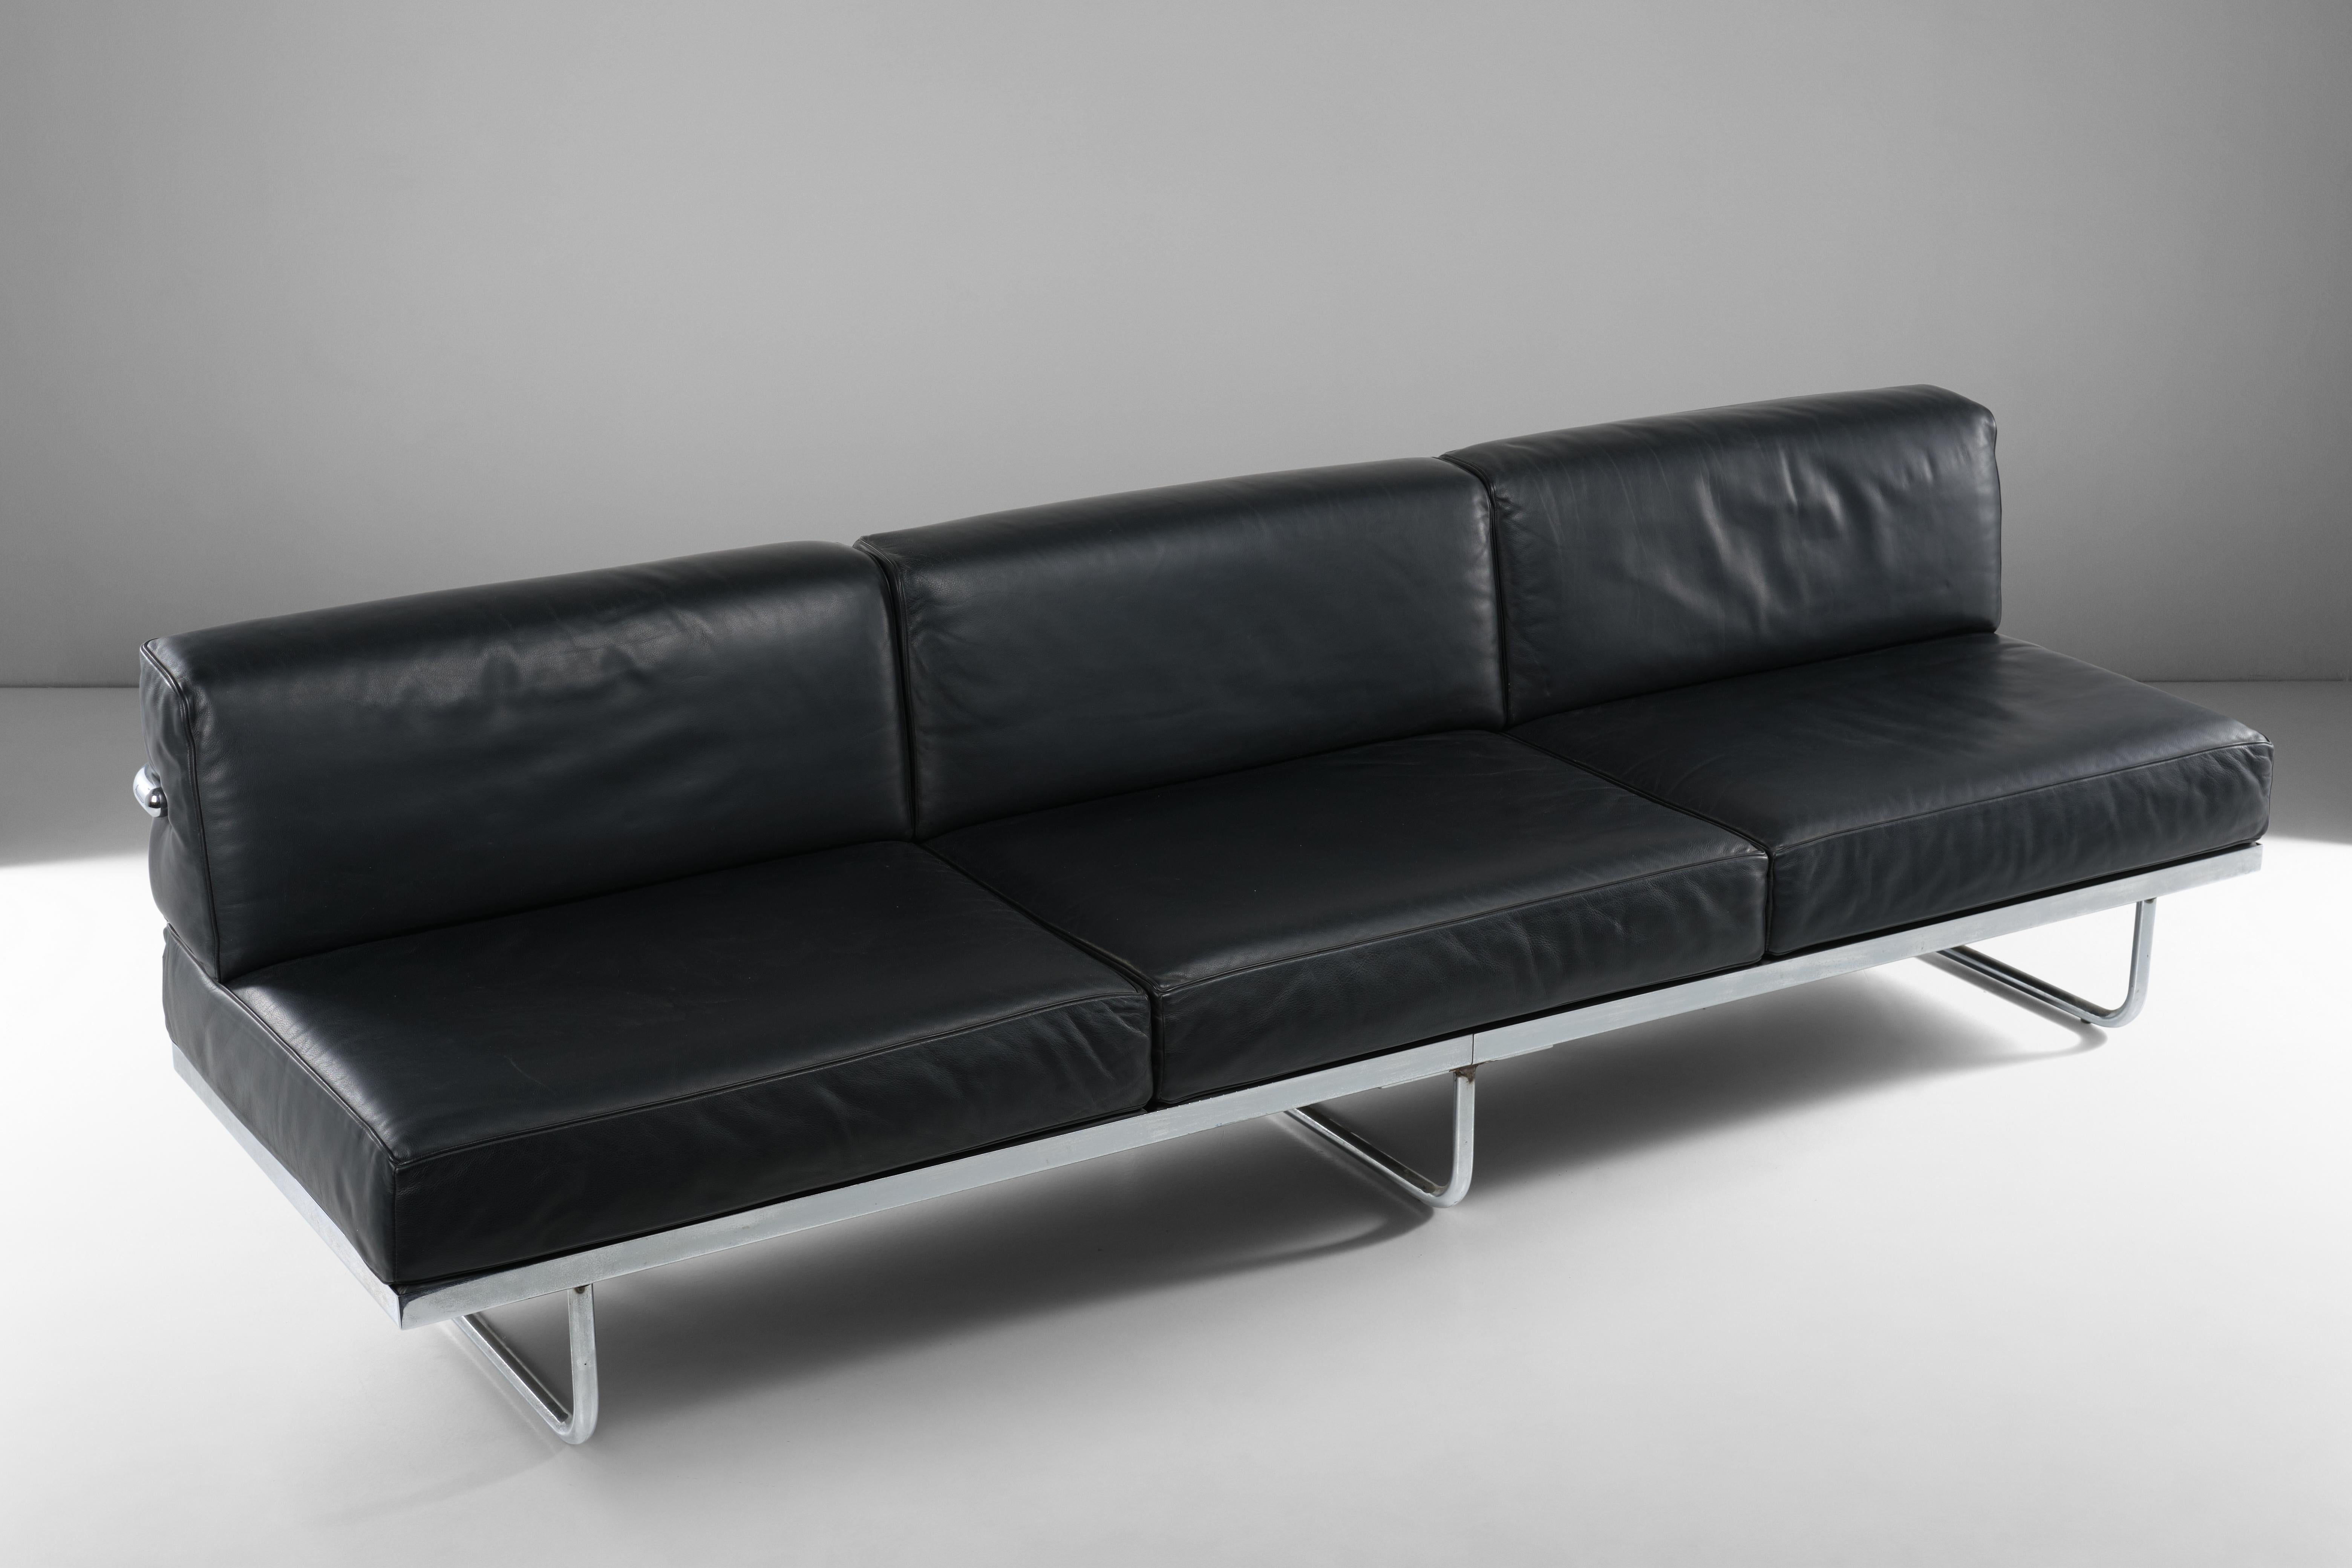 LC5 is an iconic designer sofa, distinguished by its pure, rectangular lines. Le Corbusier designed this large sofa with Pierre Jeanneret and Charlotte Perriand for the living room of his Parisian apartment in 1934. It was then re-edited by Cassina